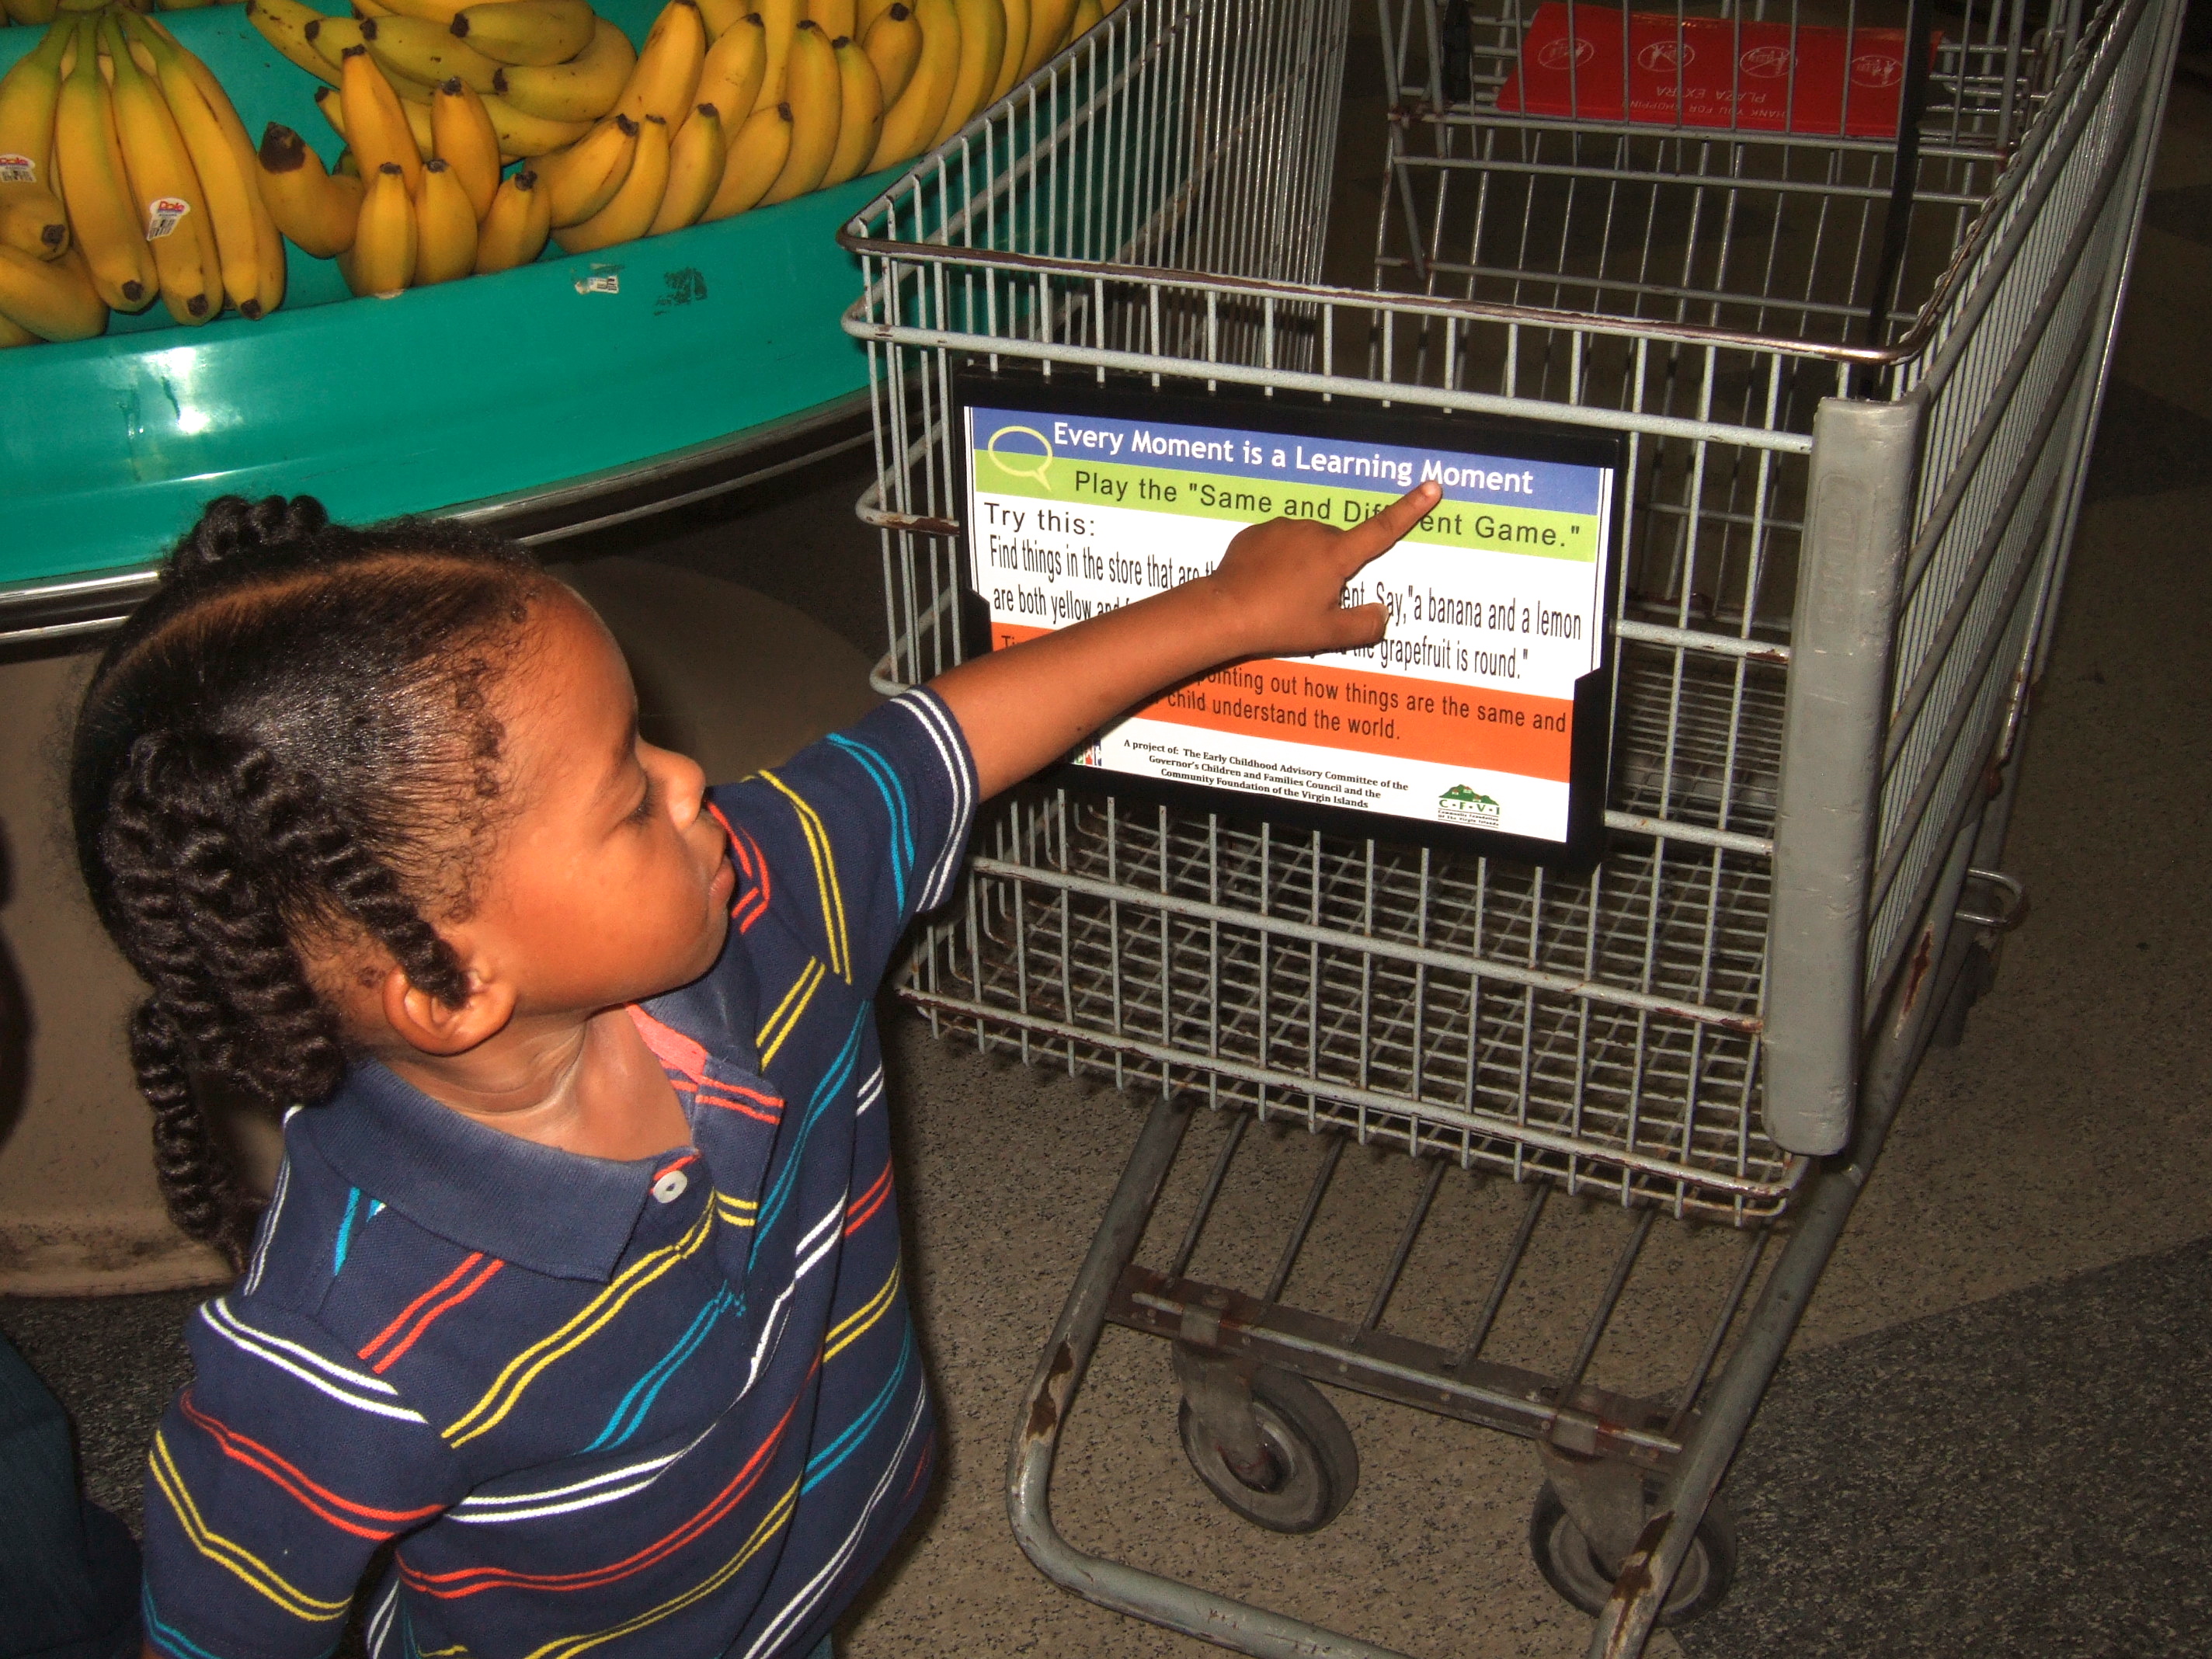 CFVI carts: Three-year-old L Trelle Nisbett points out the Everyday Moments are Learning Moments placard with games to play while shopping.